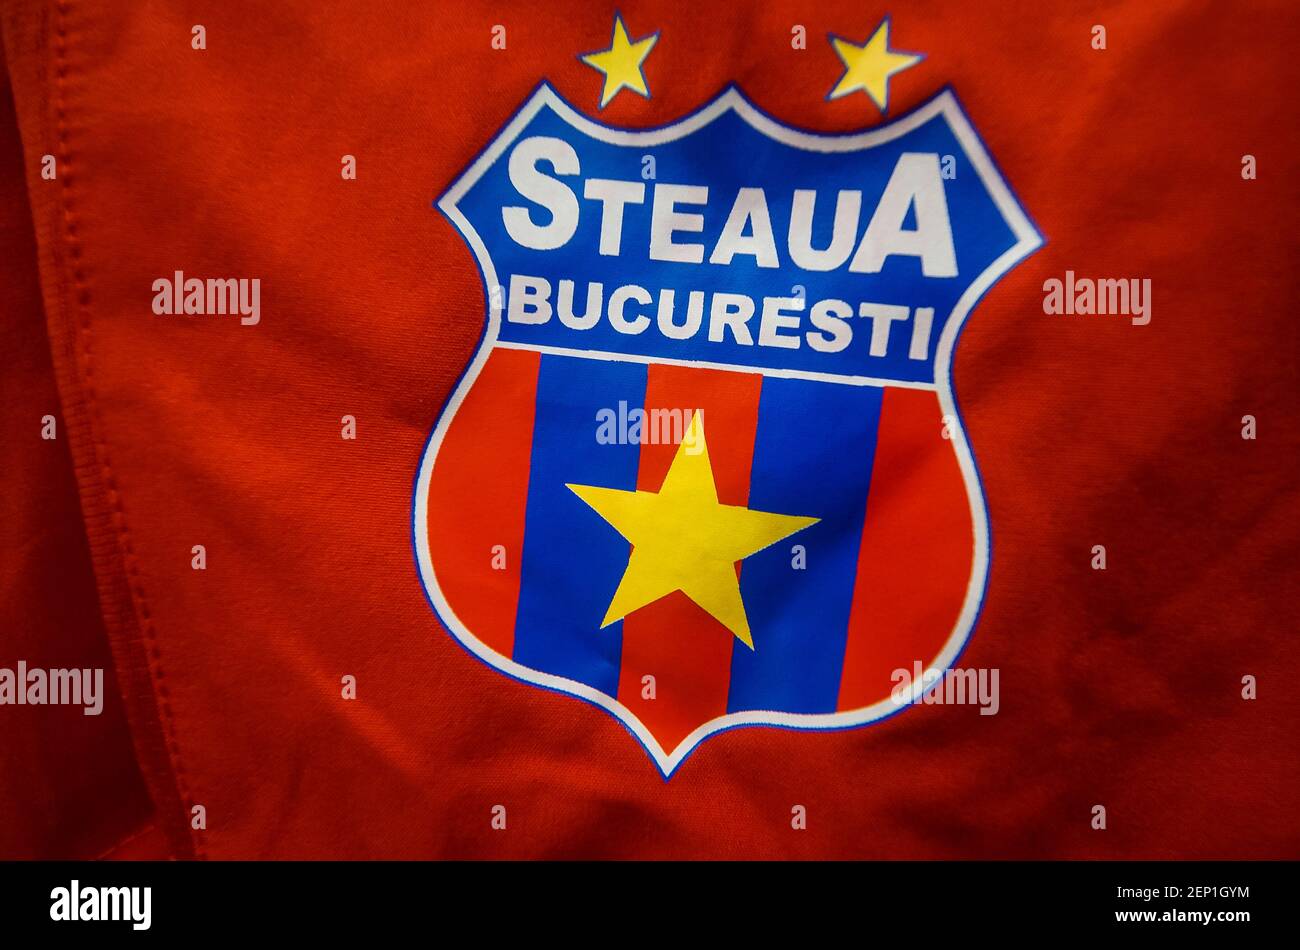 8,752 Fc Steaua Bucuresti Photos & High Res Pictures - Getty Images